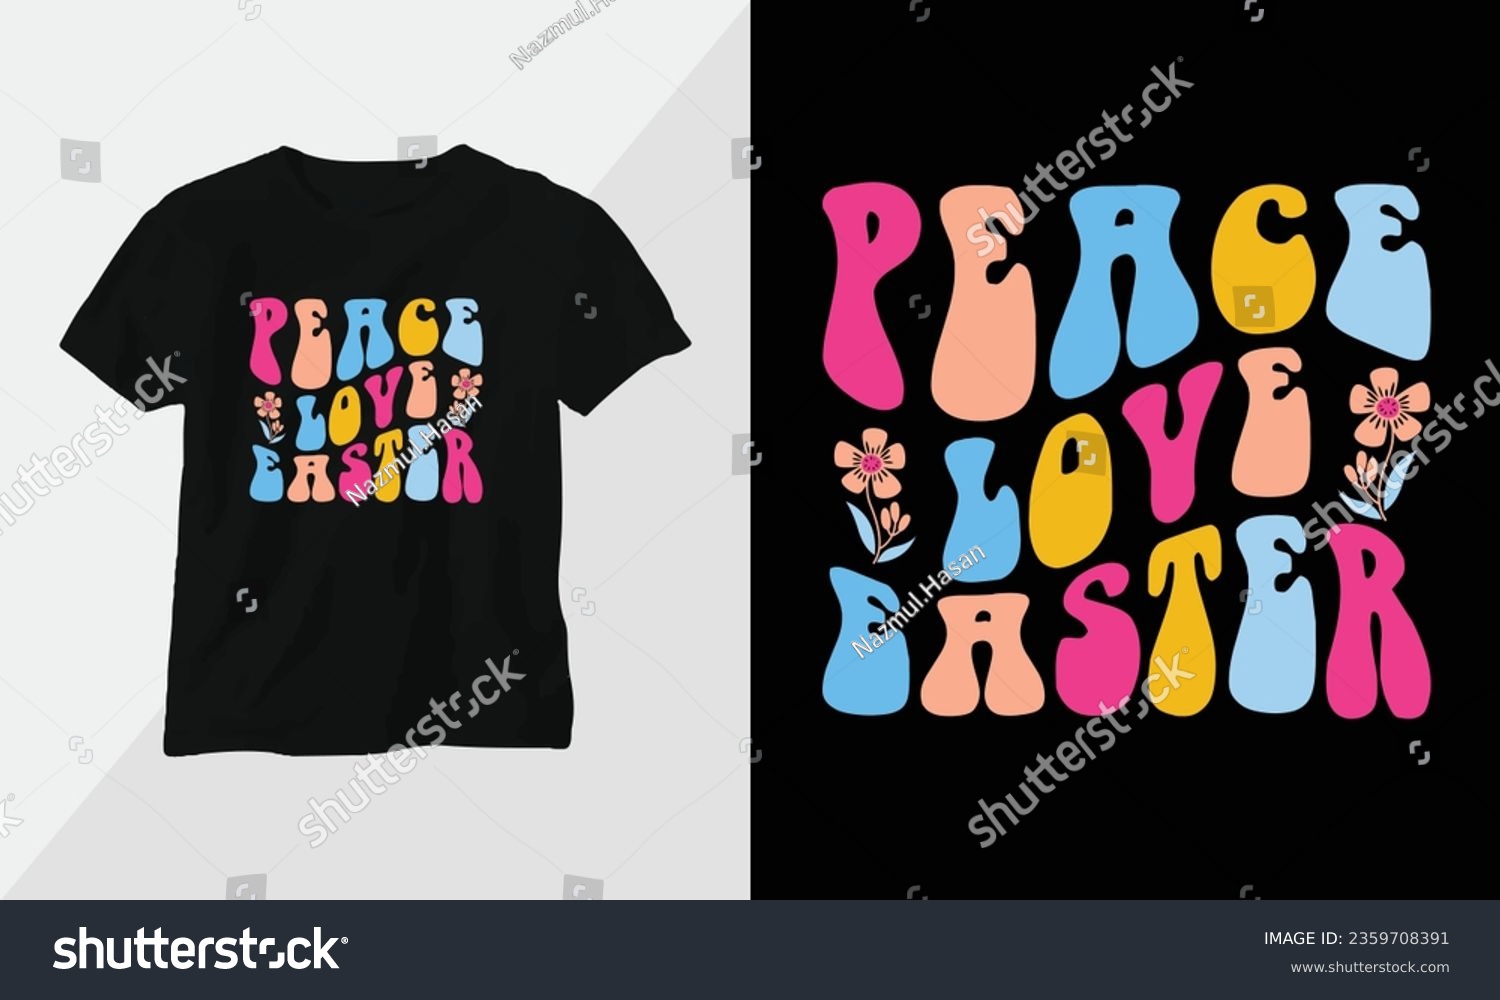 SVG of peace love easter - Retro Groovy Inspirational T-shirt Design with retro style svg